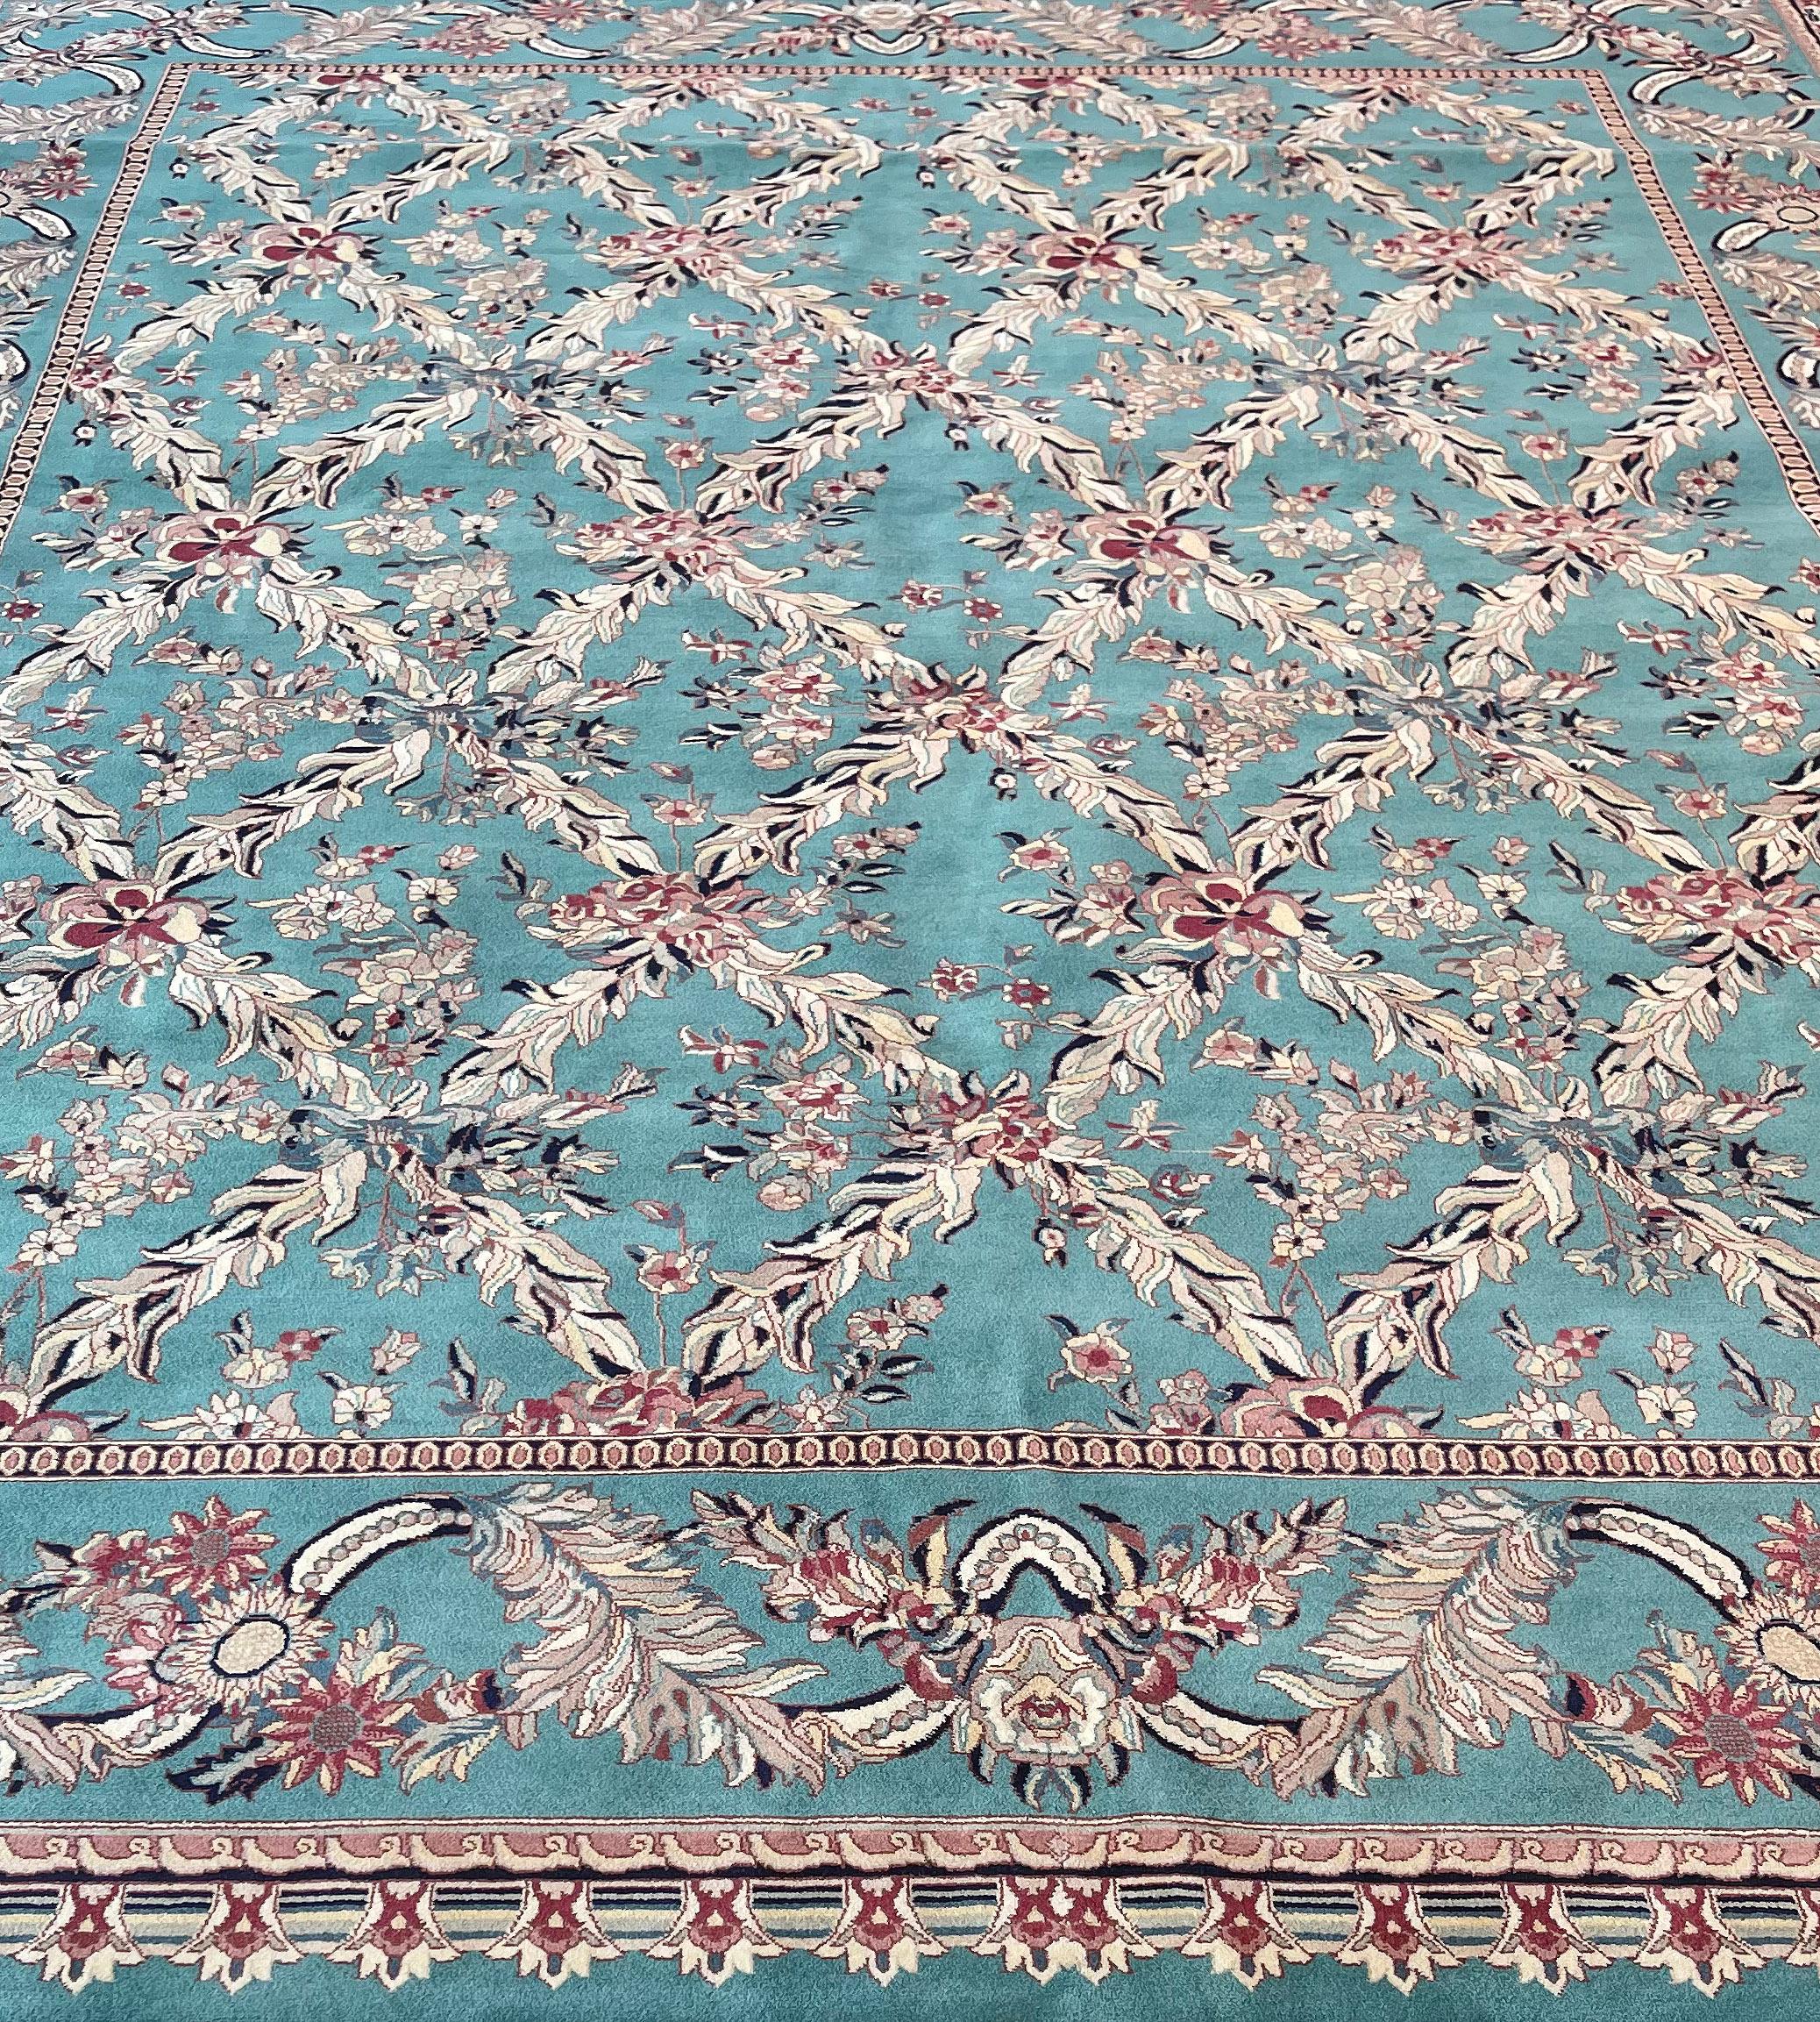 Genuine handwoven Tabriz rug from Pakistan. This exceptionally high quality rug features a superb master weave and a beautiful color combination. 100% Fine natural wool pile on cotton foundation.